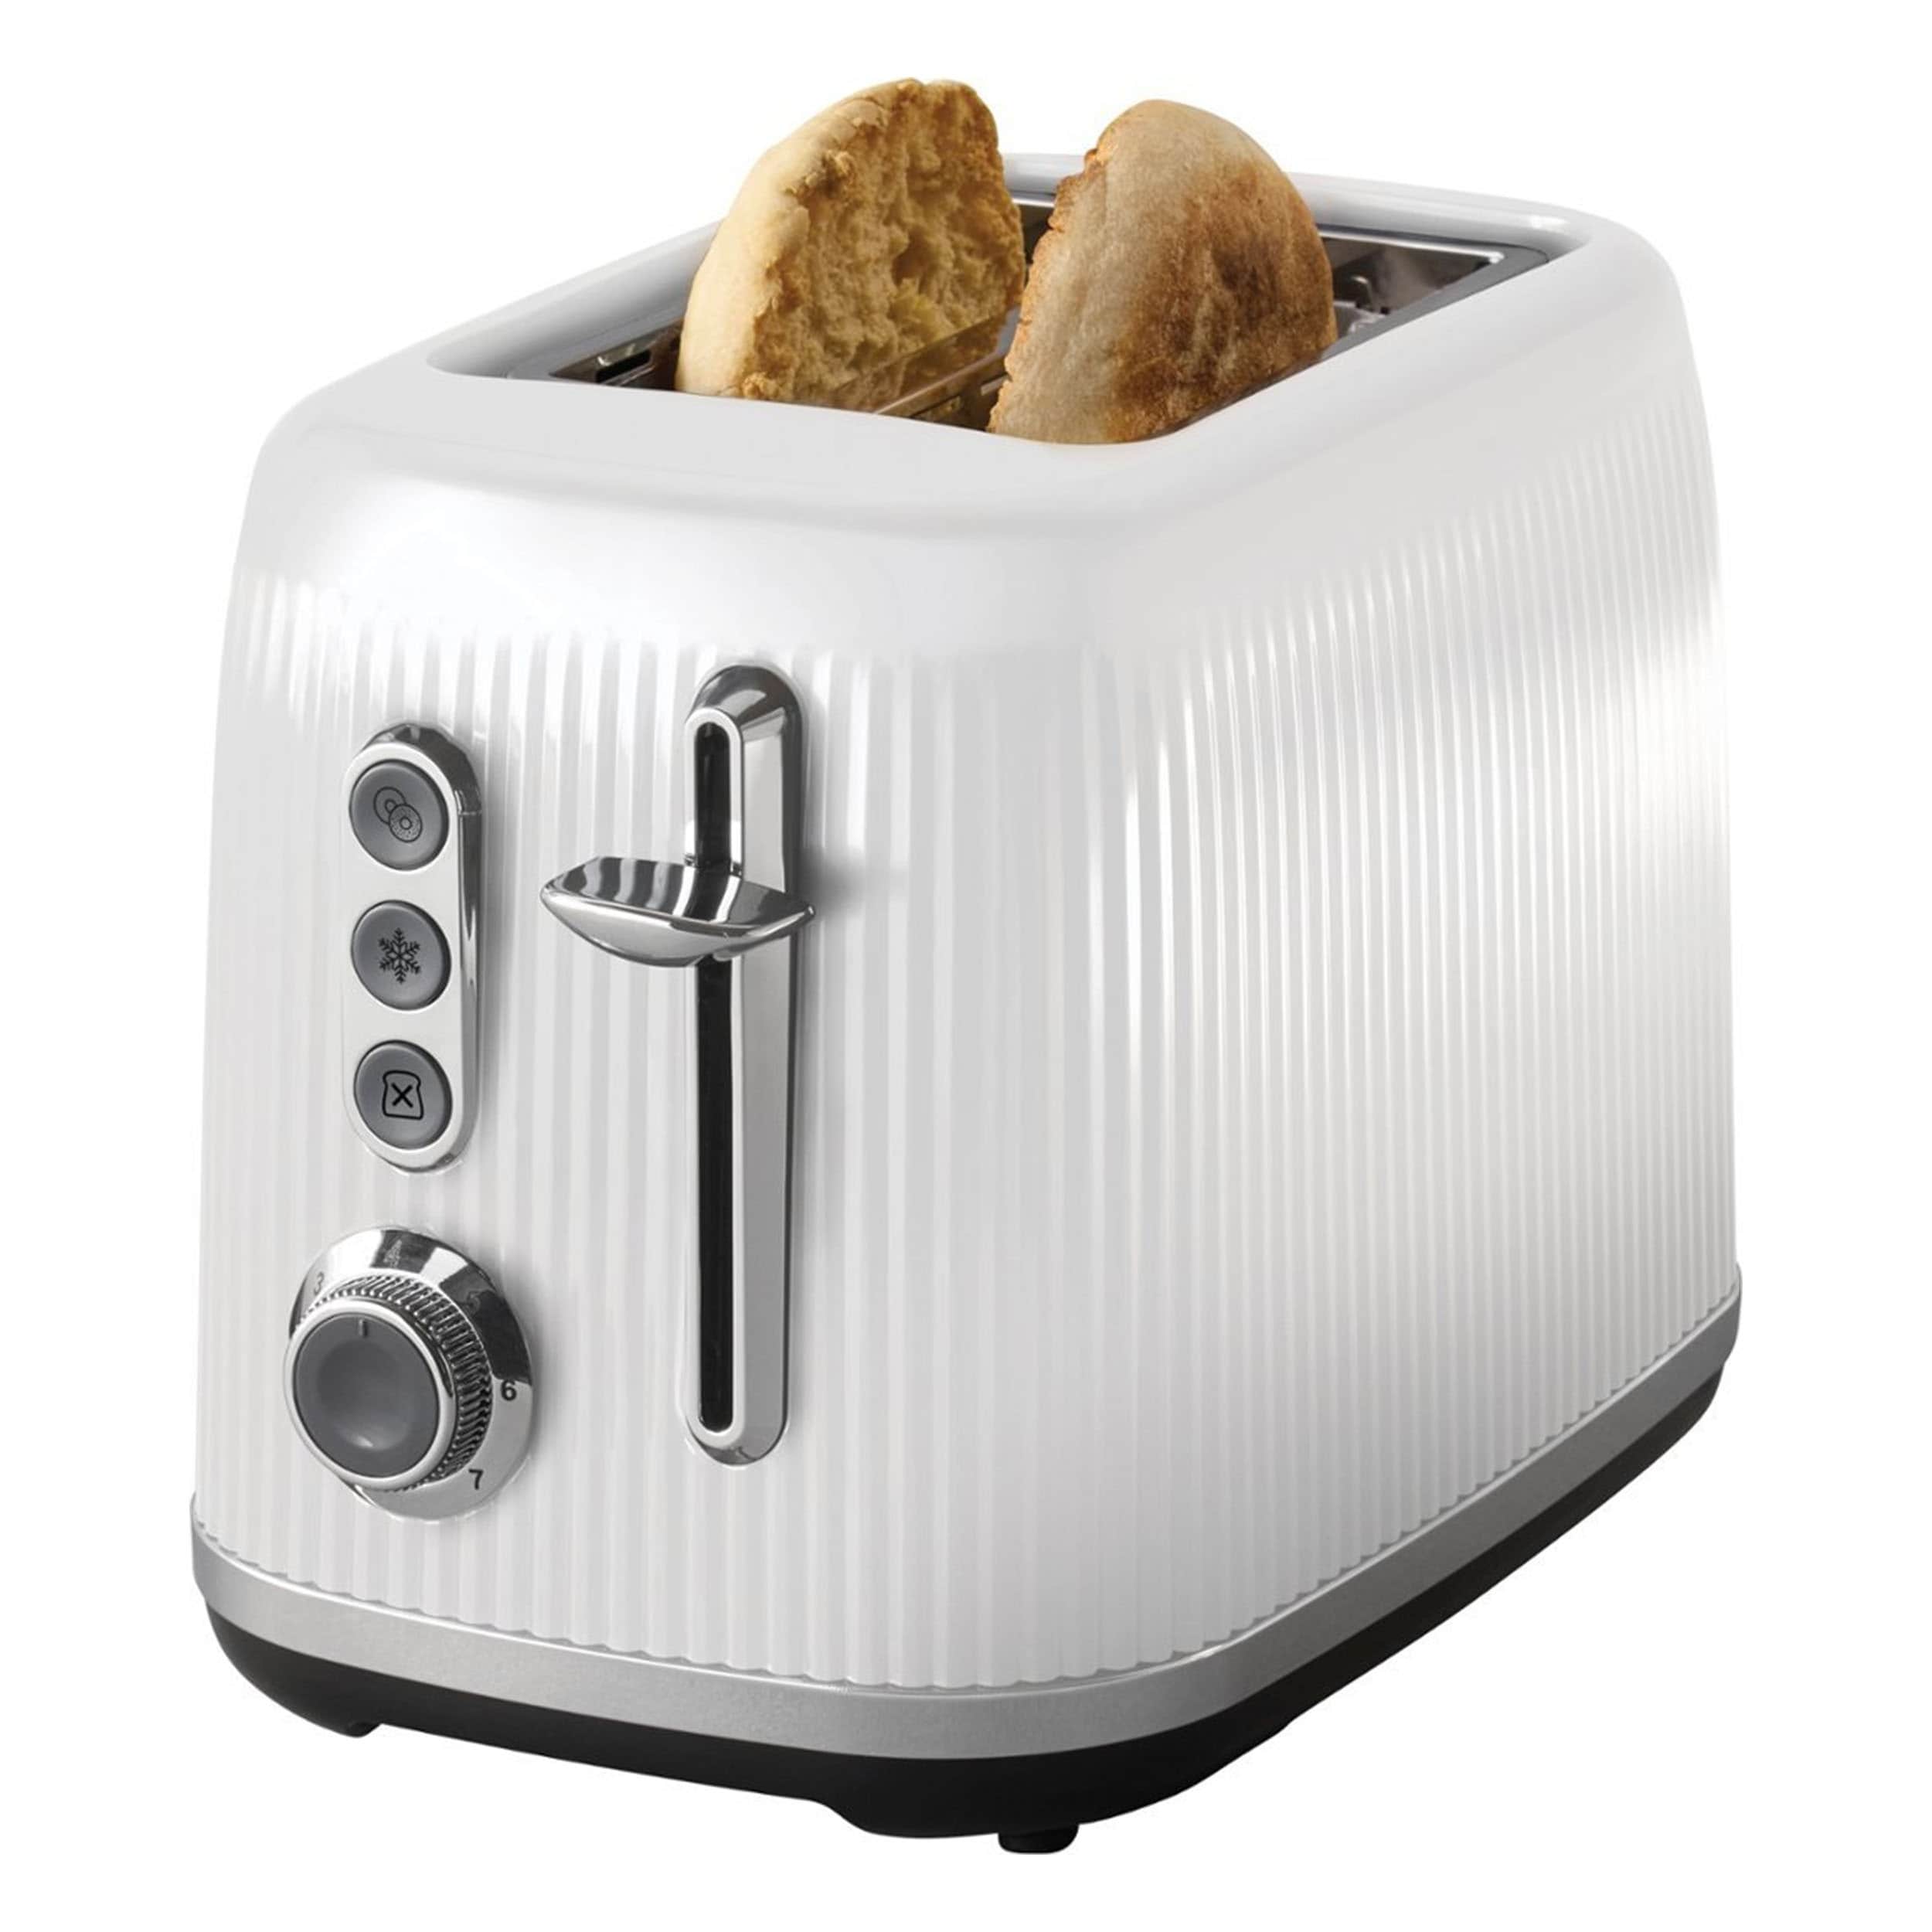 https://ak1.ostkcdn.com/images/products/is/images/direct/4e69518a3ff54fdf840664a9cb4905d99e49ea46/Vintage-Extra-Wide-Slot-2-Slice-Toaster-in-White.jpg